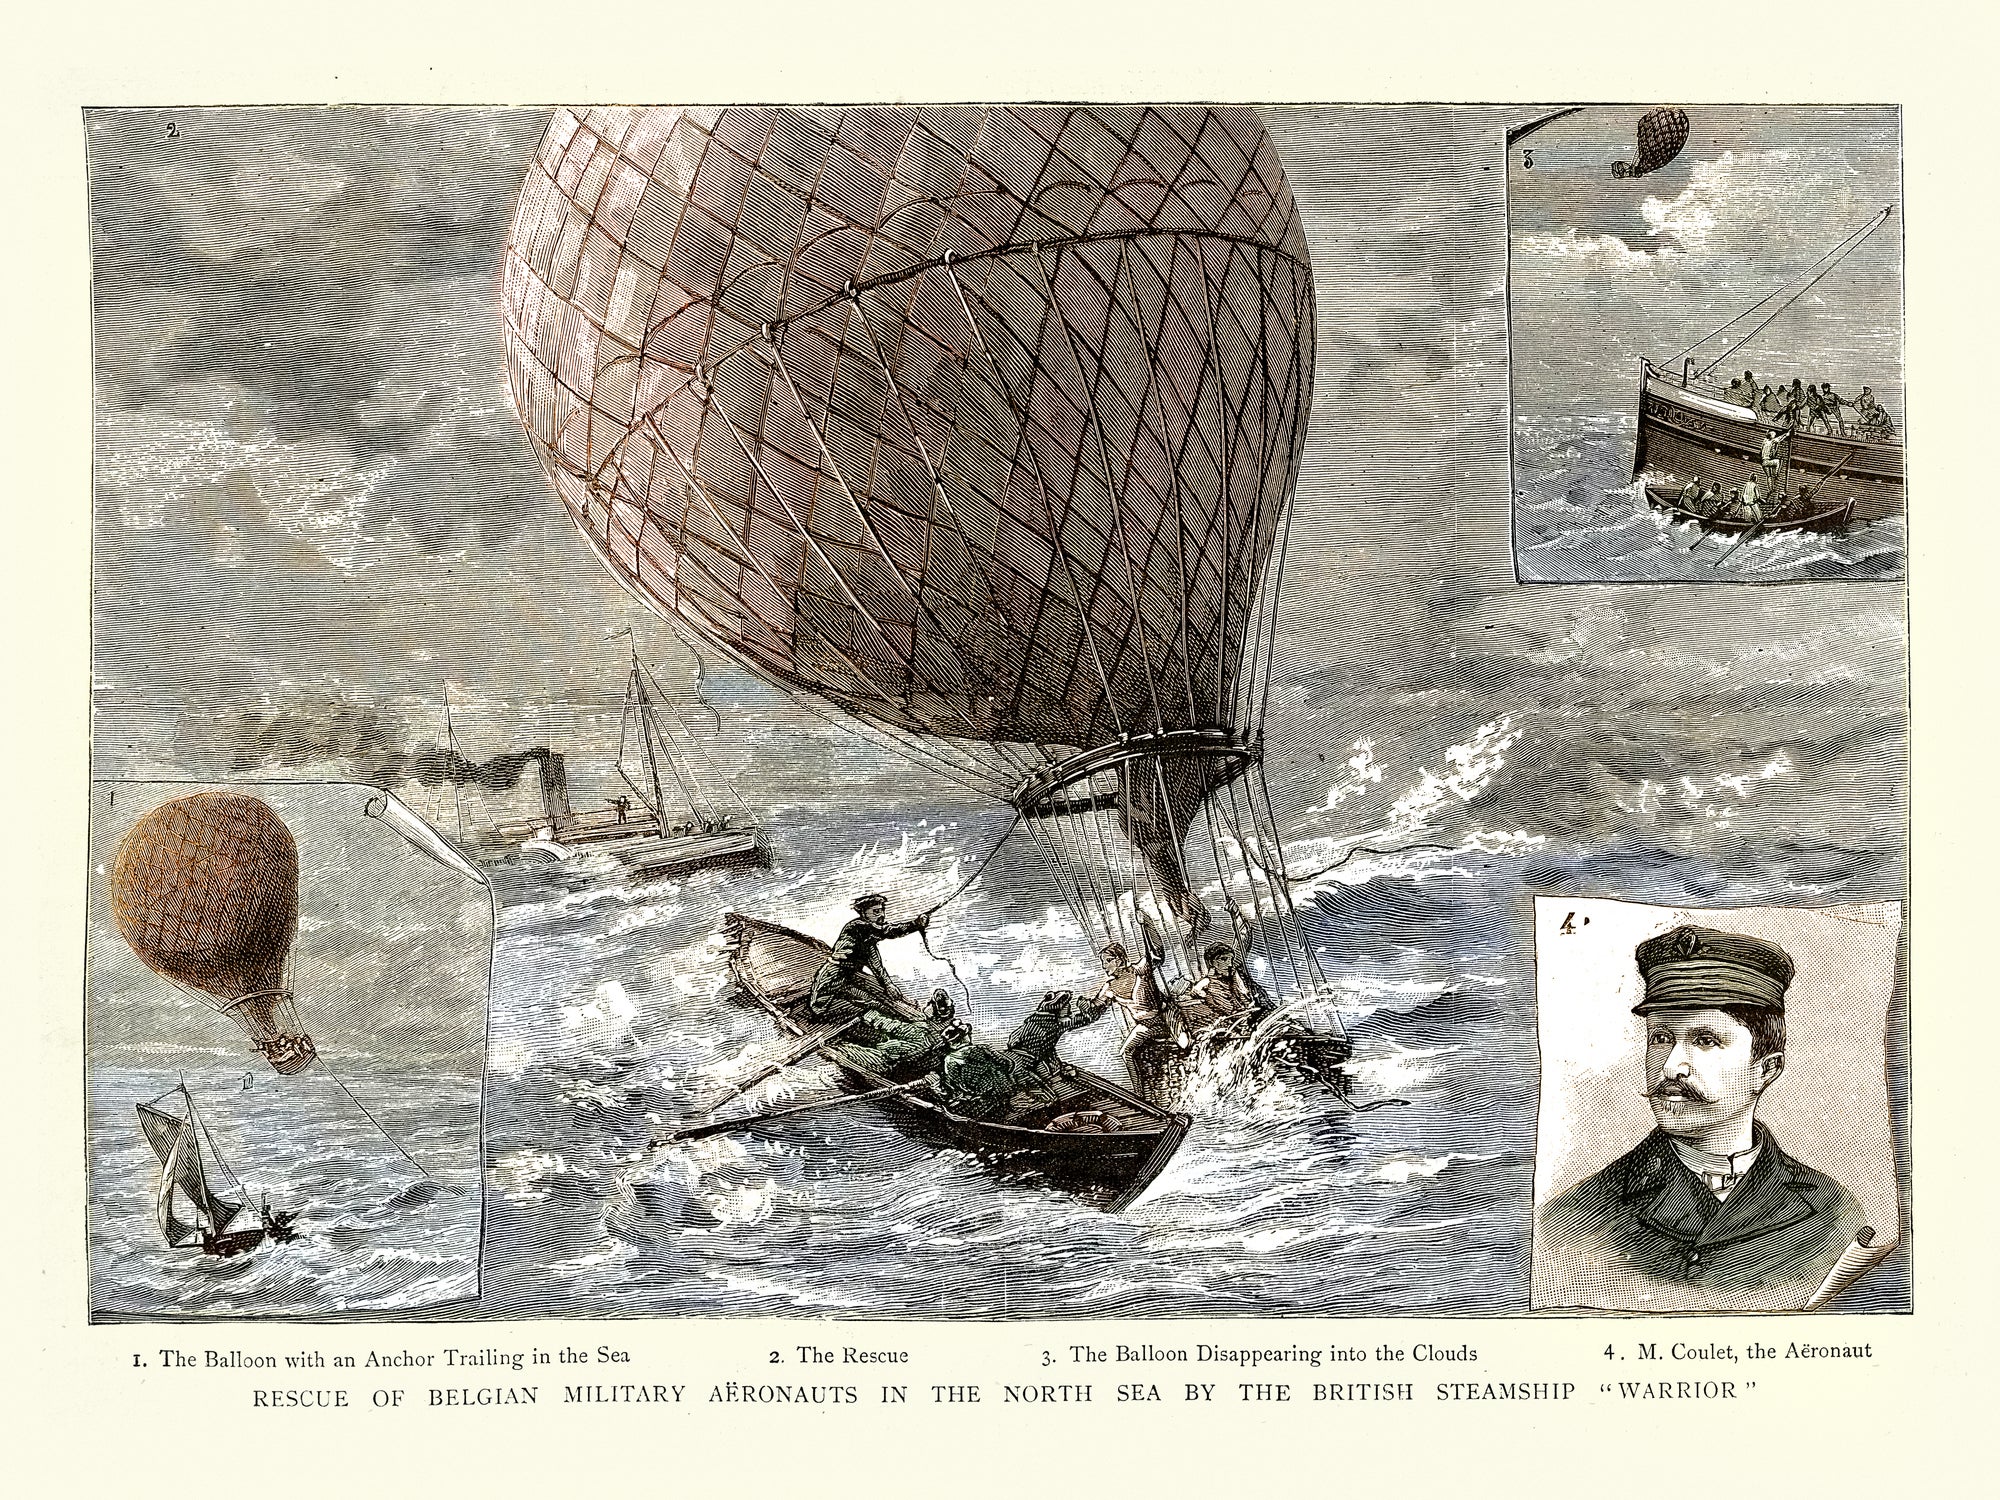 Some Belgian aeronauts being subjected to assistance by British sailors in about 1880